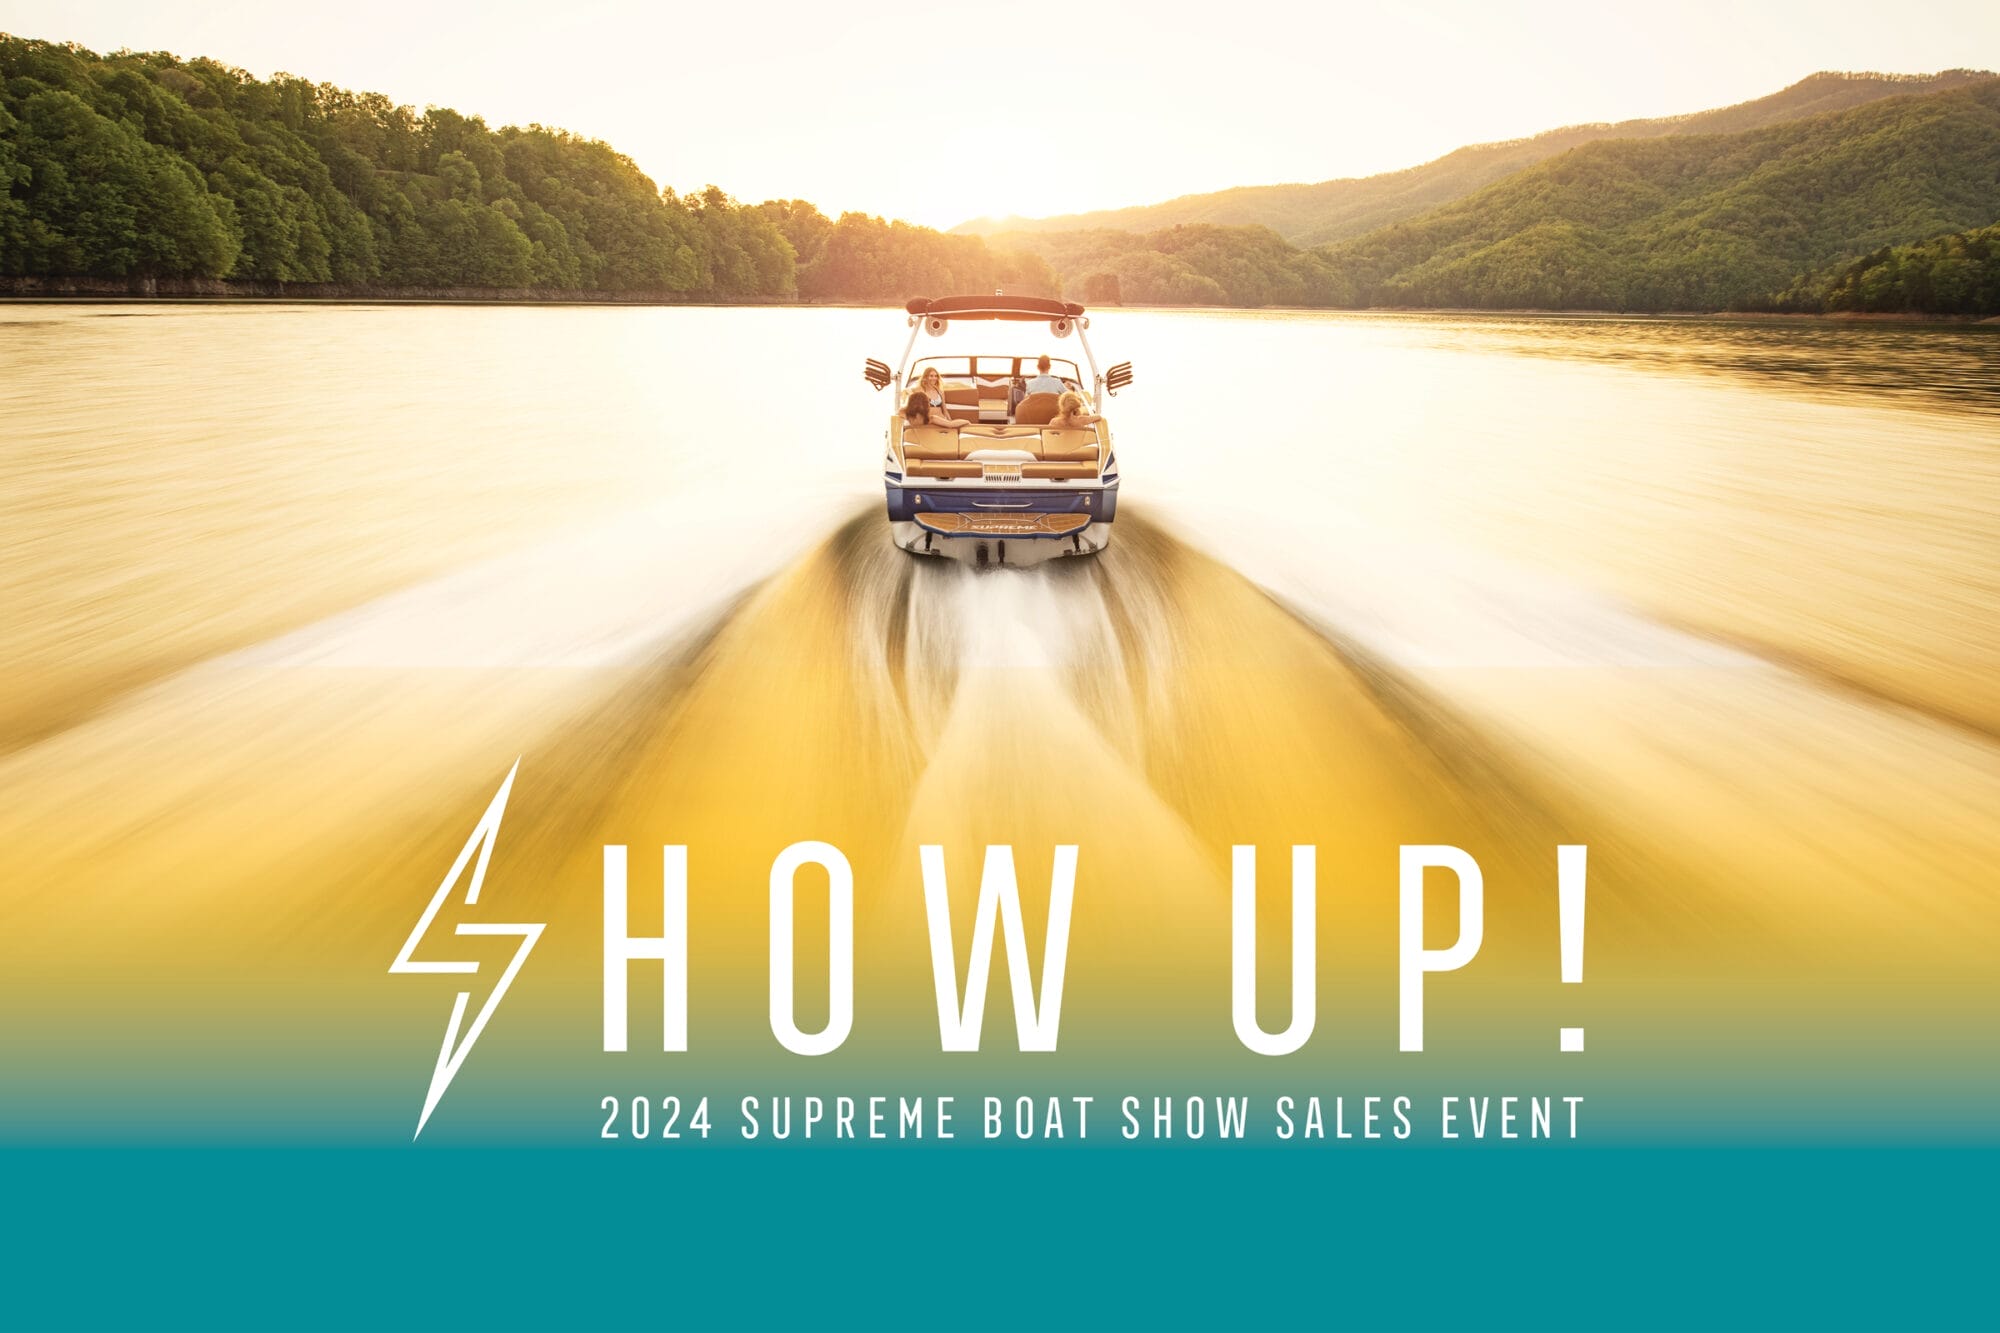 Are you ready for the ultimate boat show experience? Don't miss out on our Supreme Sales Event of 2014, where we'll elevate your expectations and take your sales to the next level!